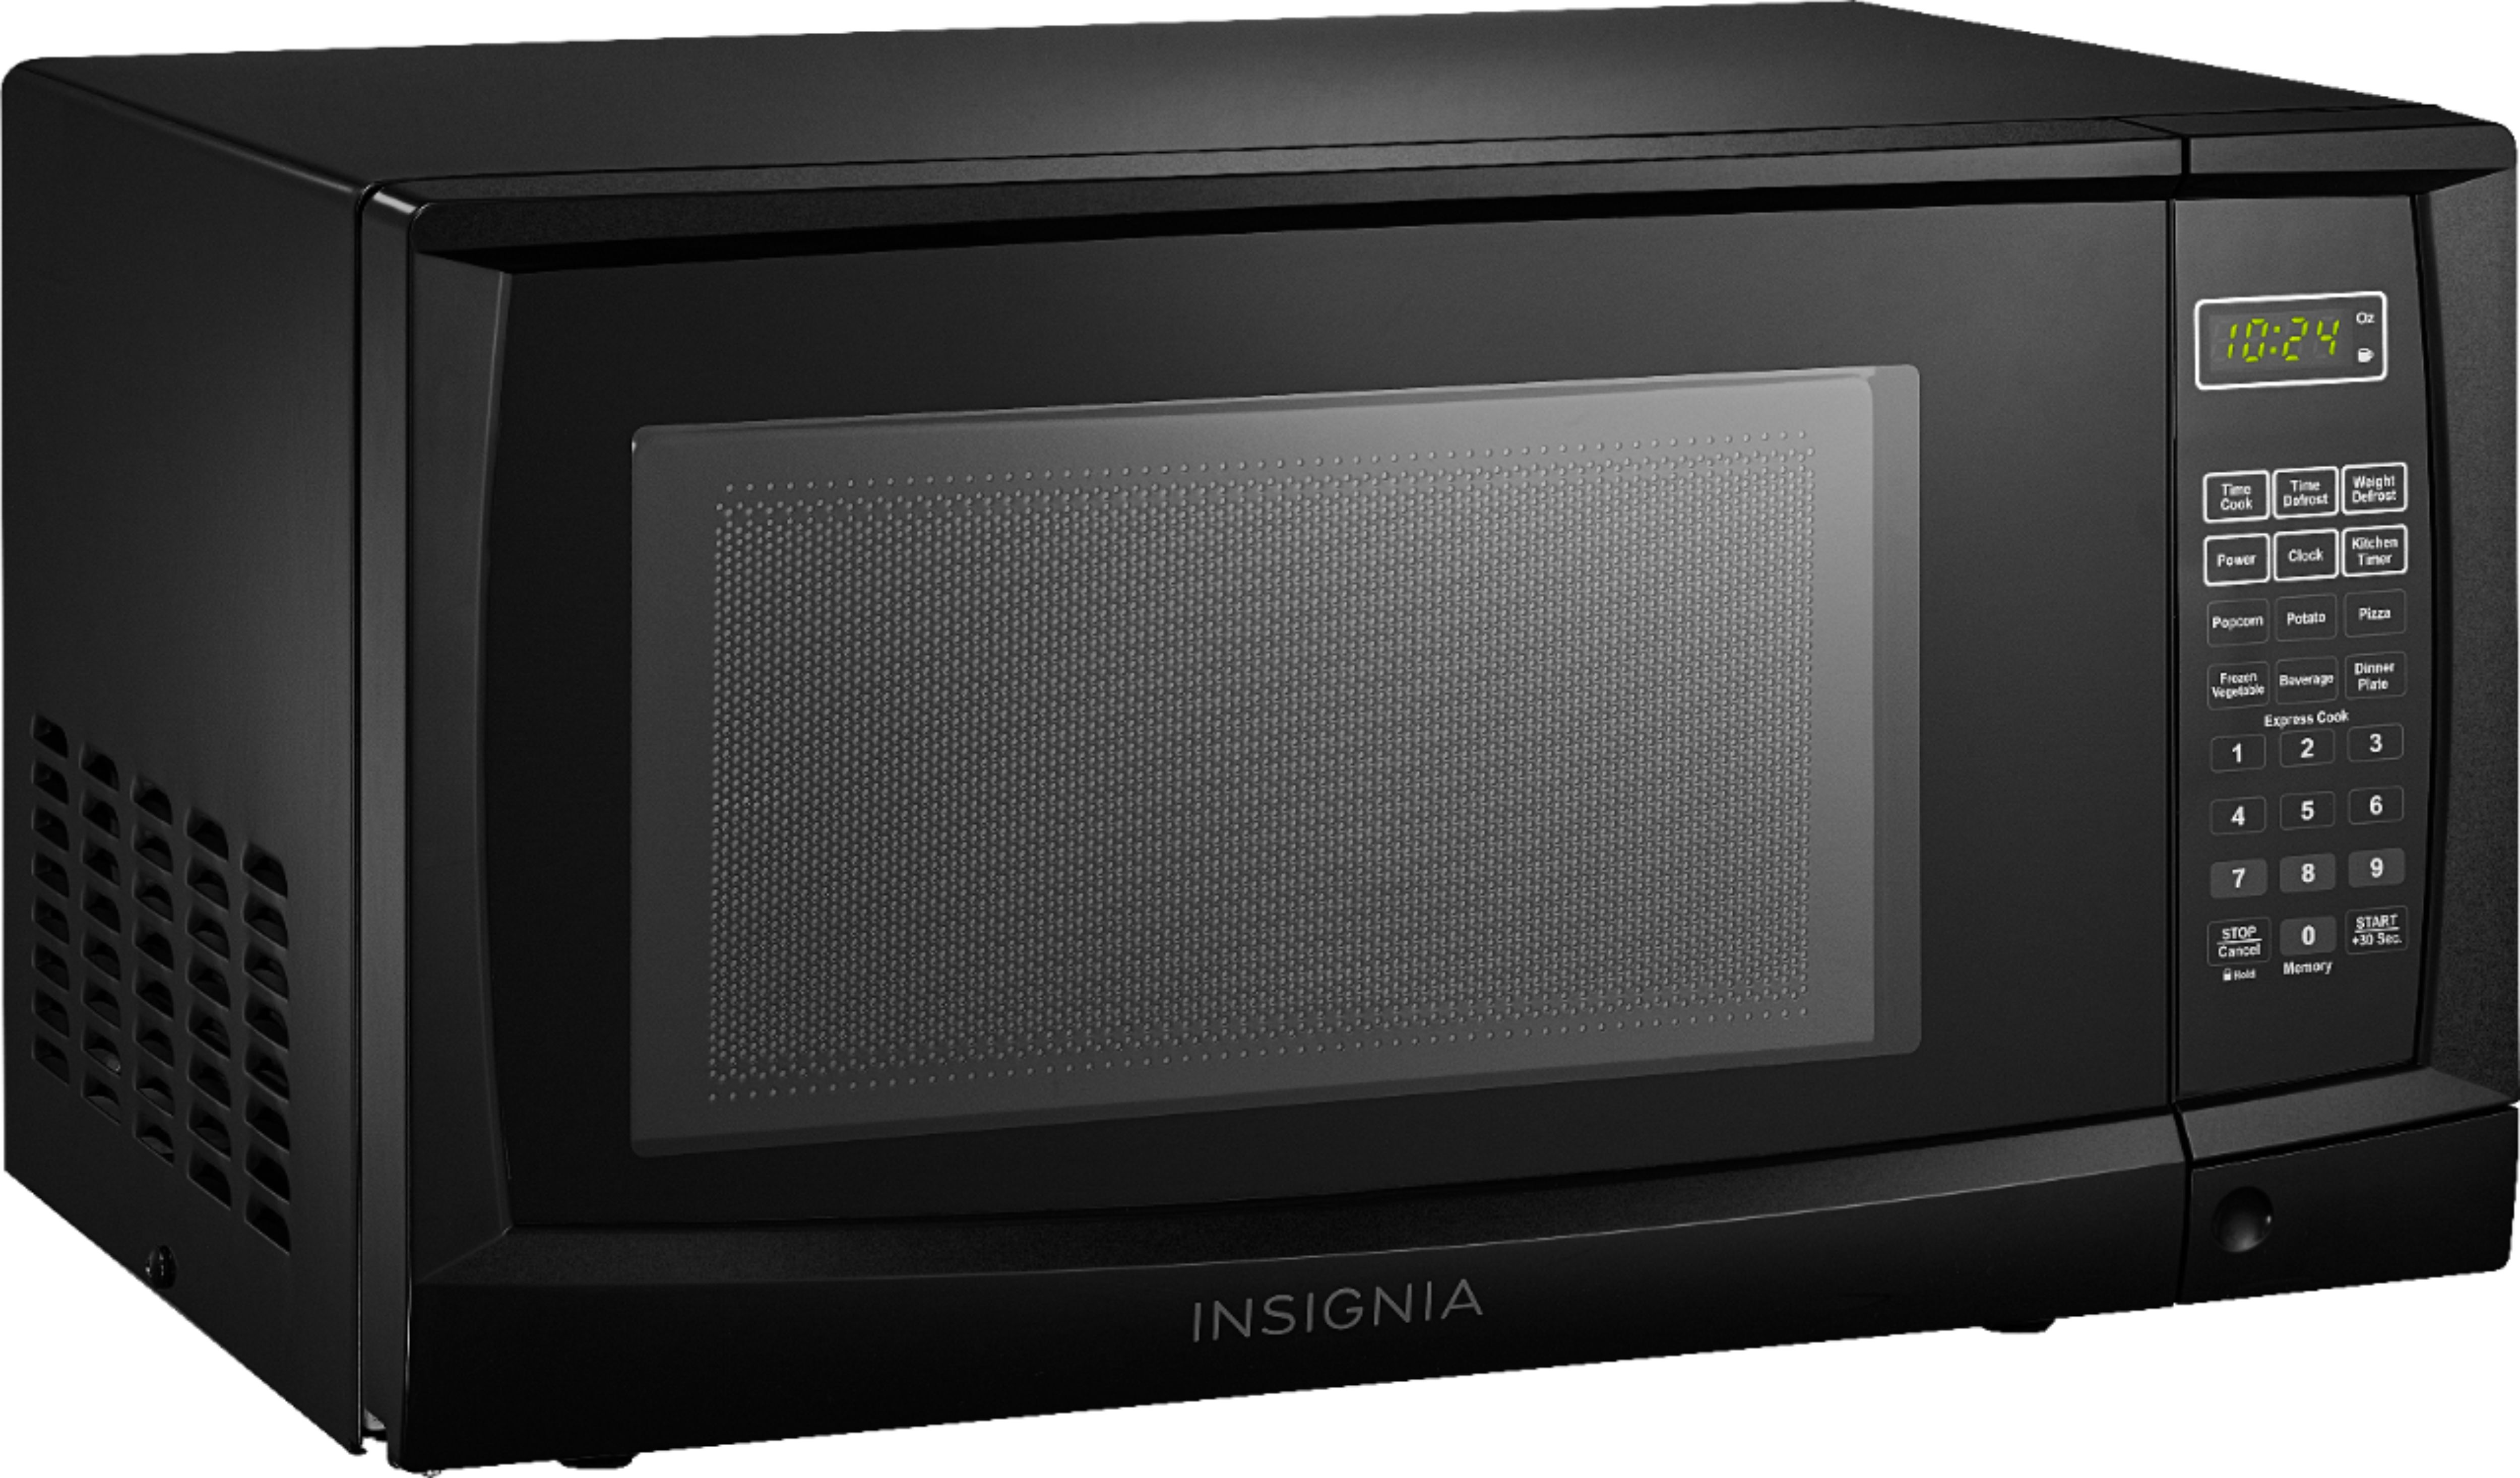 Compact, 0.7 cu. ft. 230 Volt Microwave by Muave